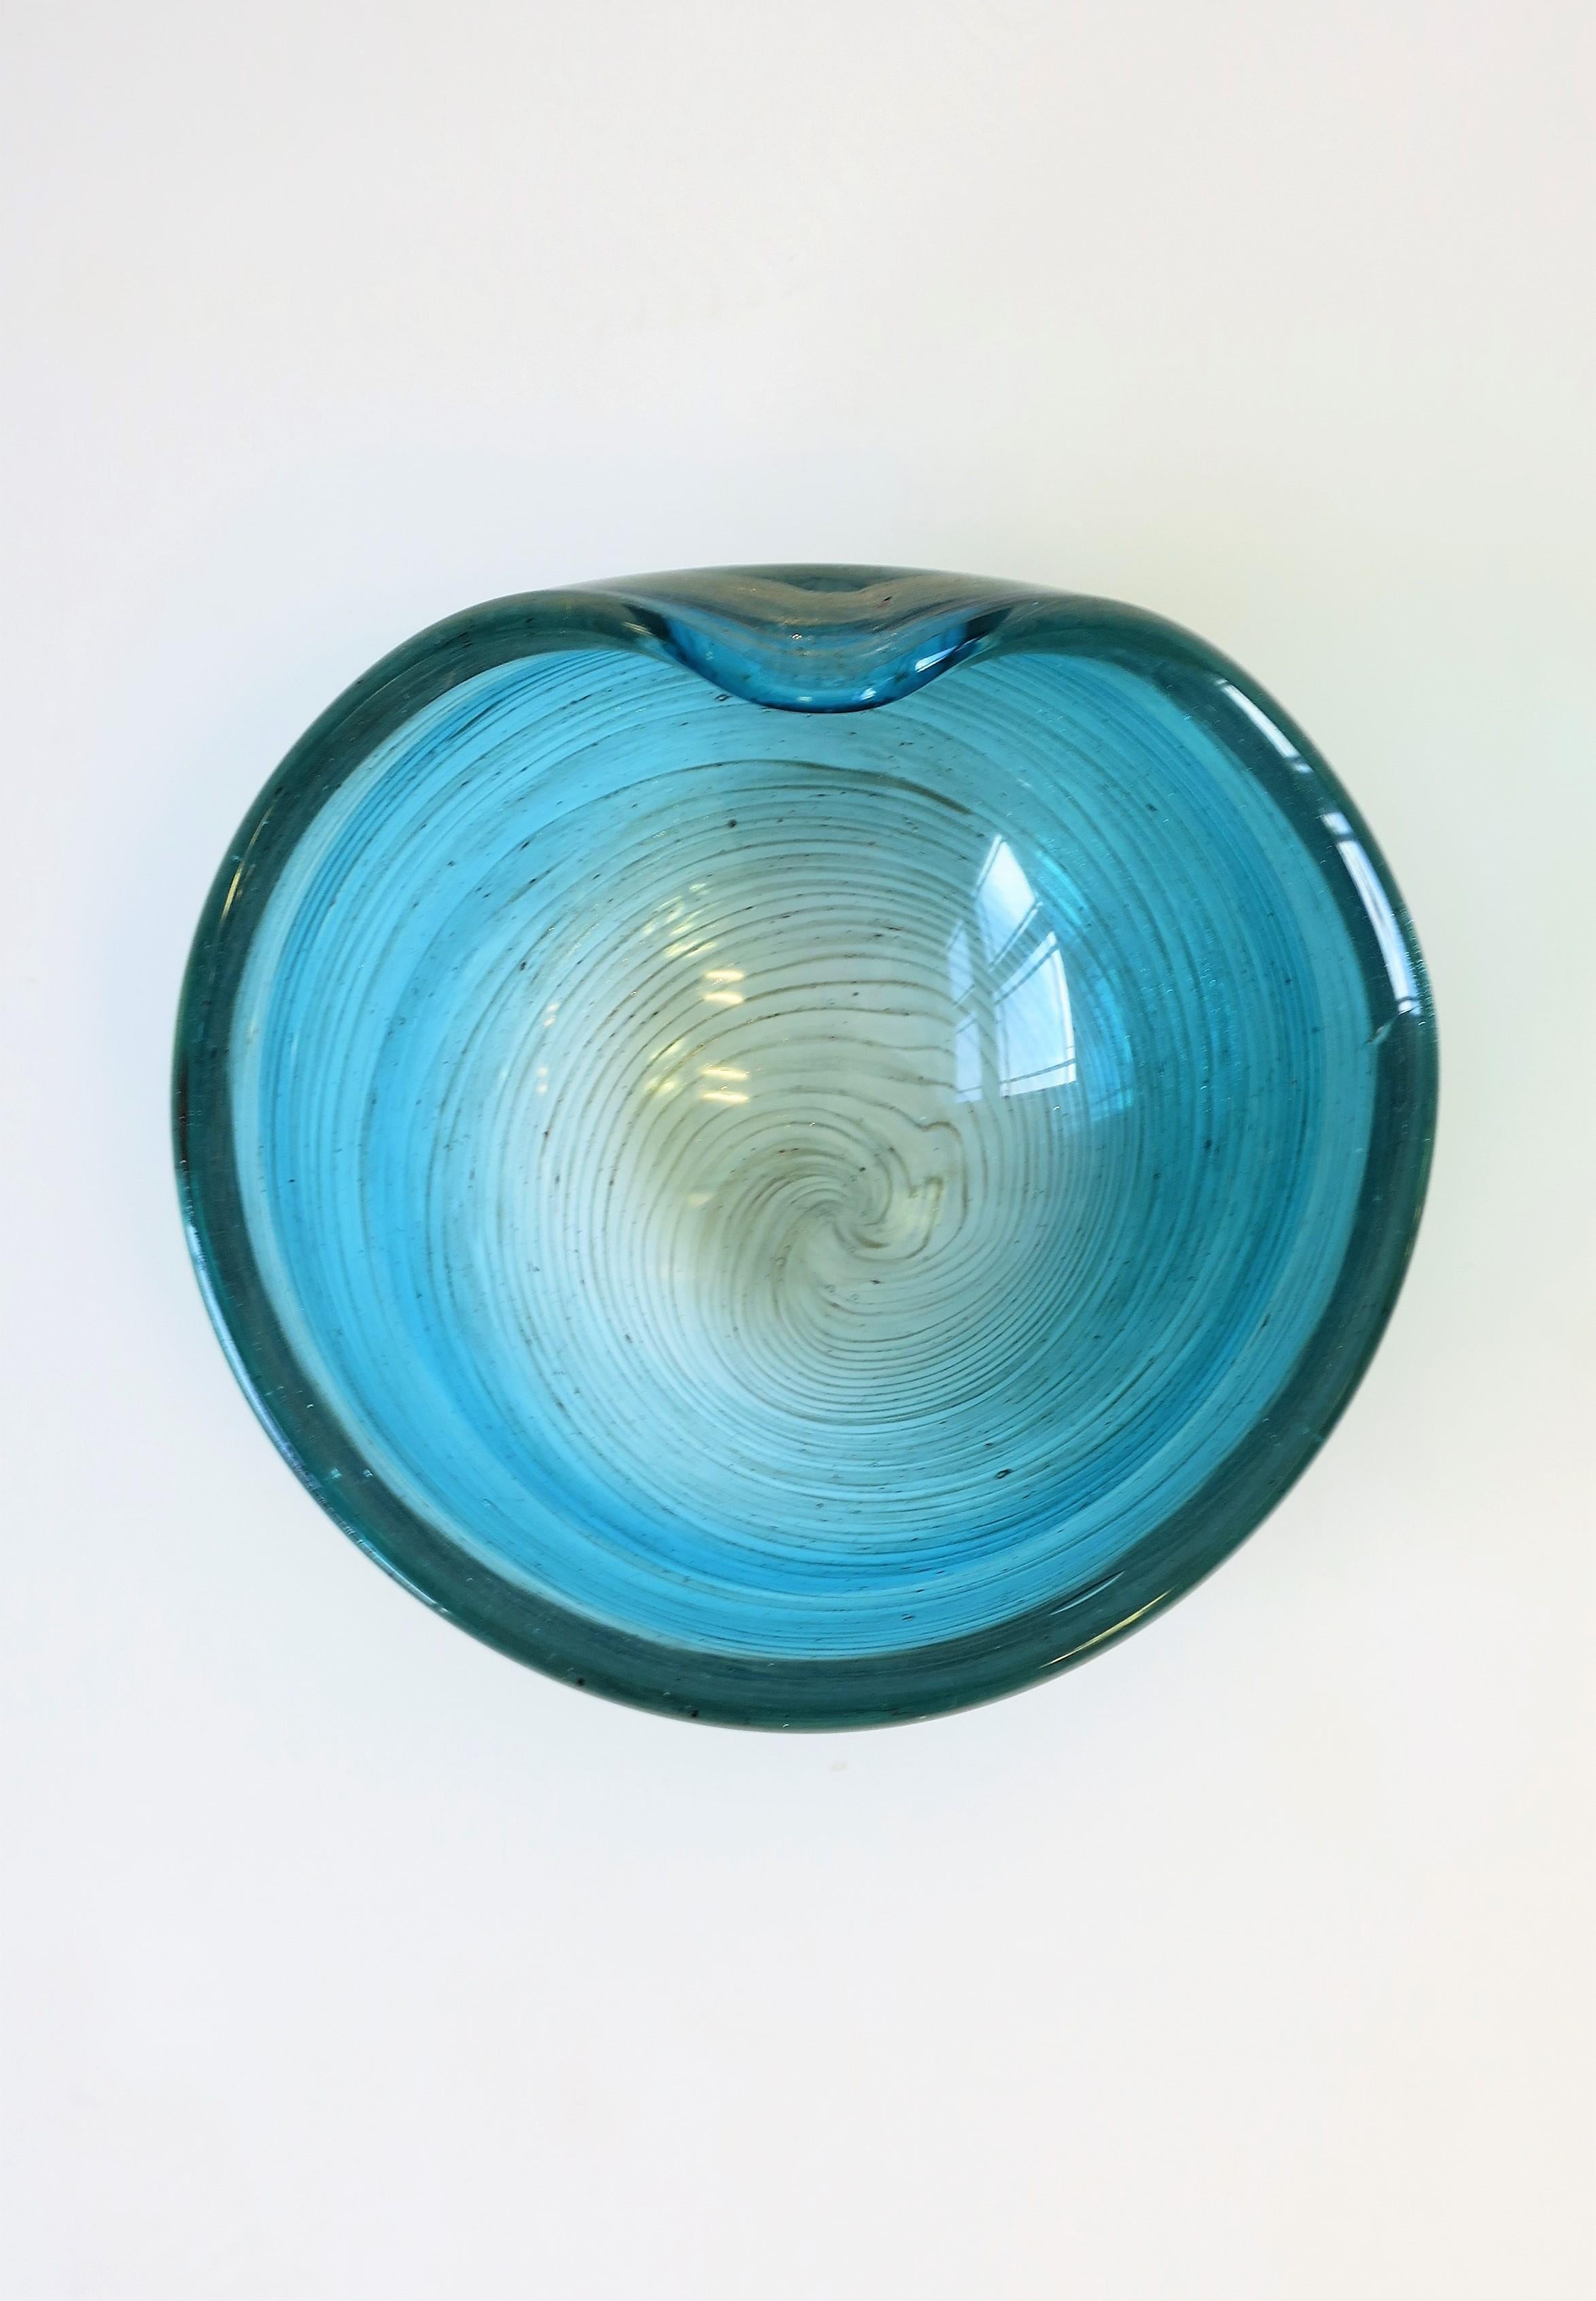 A beautiful vintage mid-20th century Italian Murano clear and Ombre blue bowl with thin swirls of shimmering copper art glass, Italy circa 1960s, Italy. Colors blue and shimmering copper make a nice combination as show in images. 

Bowl measures: